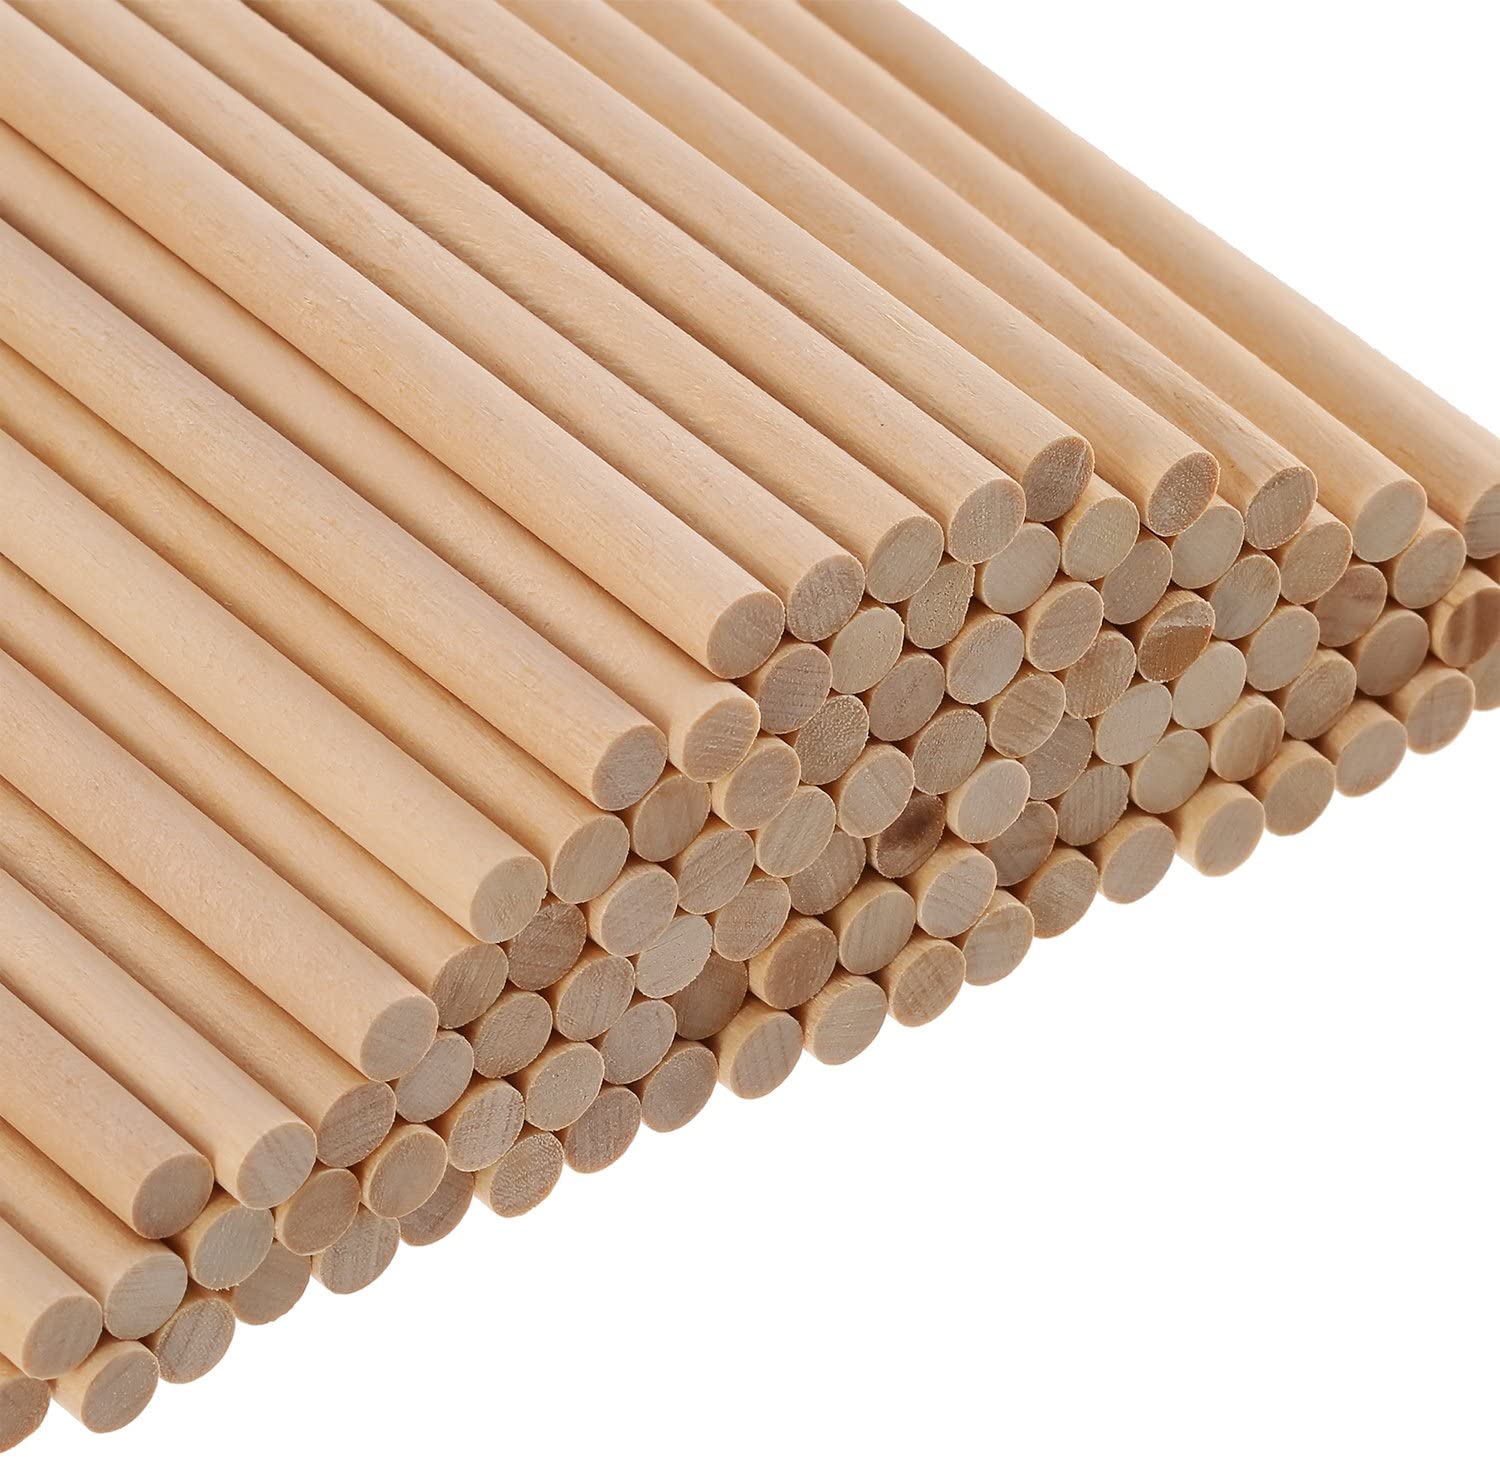 High quality wooden round shape dowel rods and stick (1).jpg